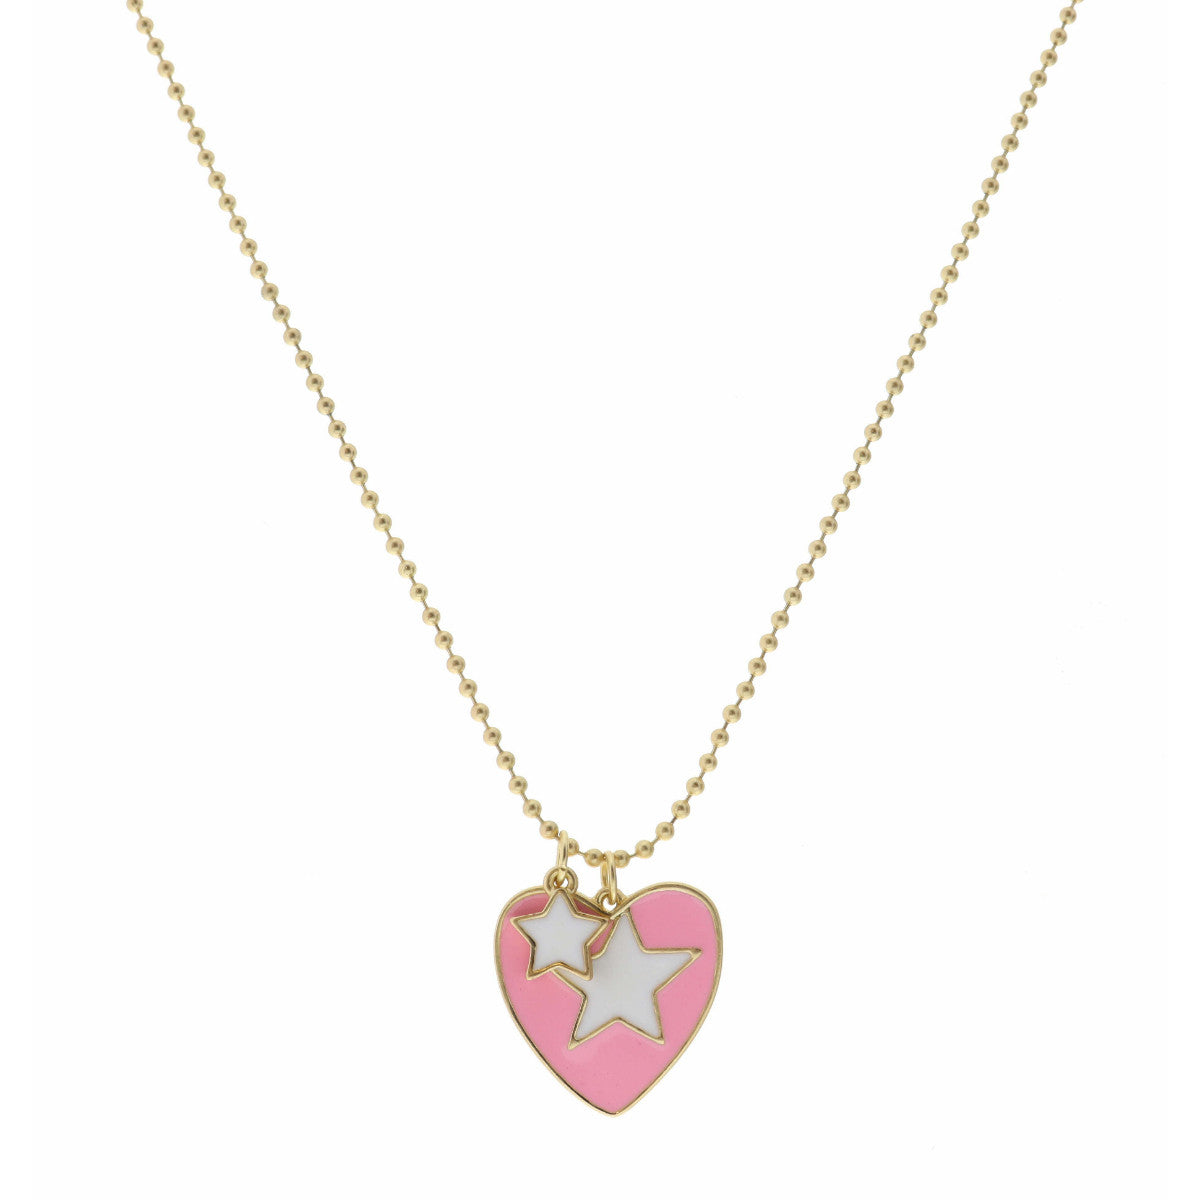 Heart & Star Charm Necklace